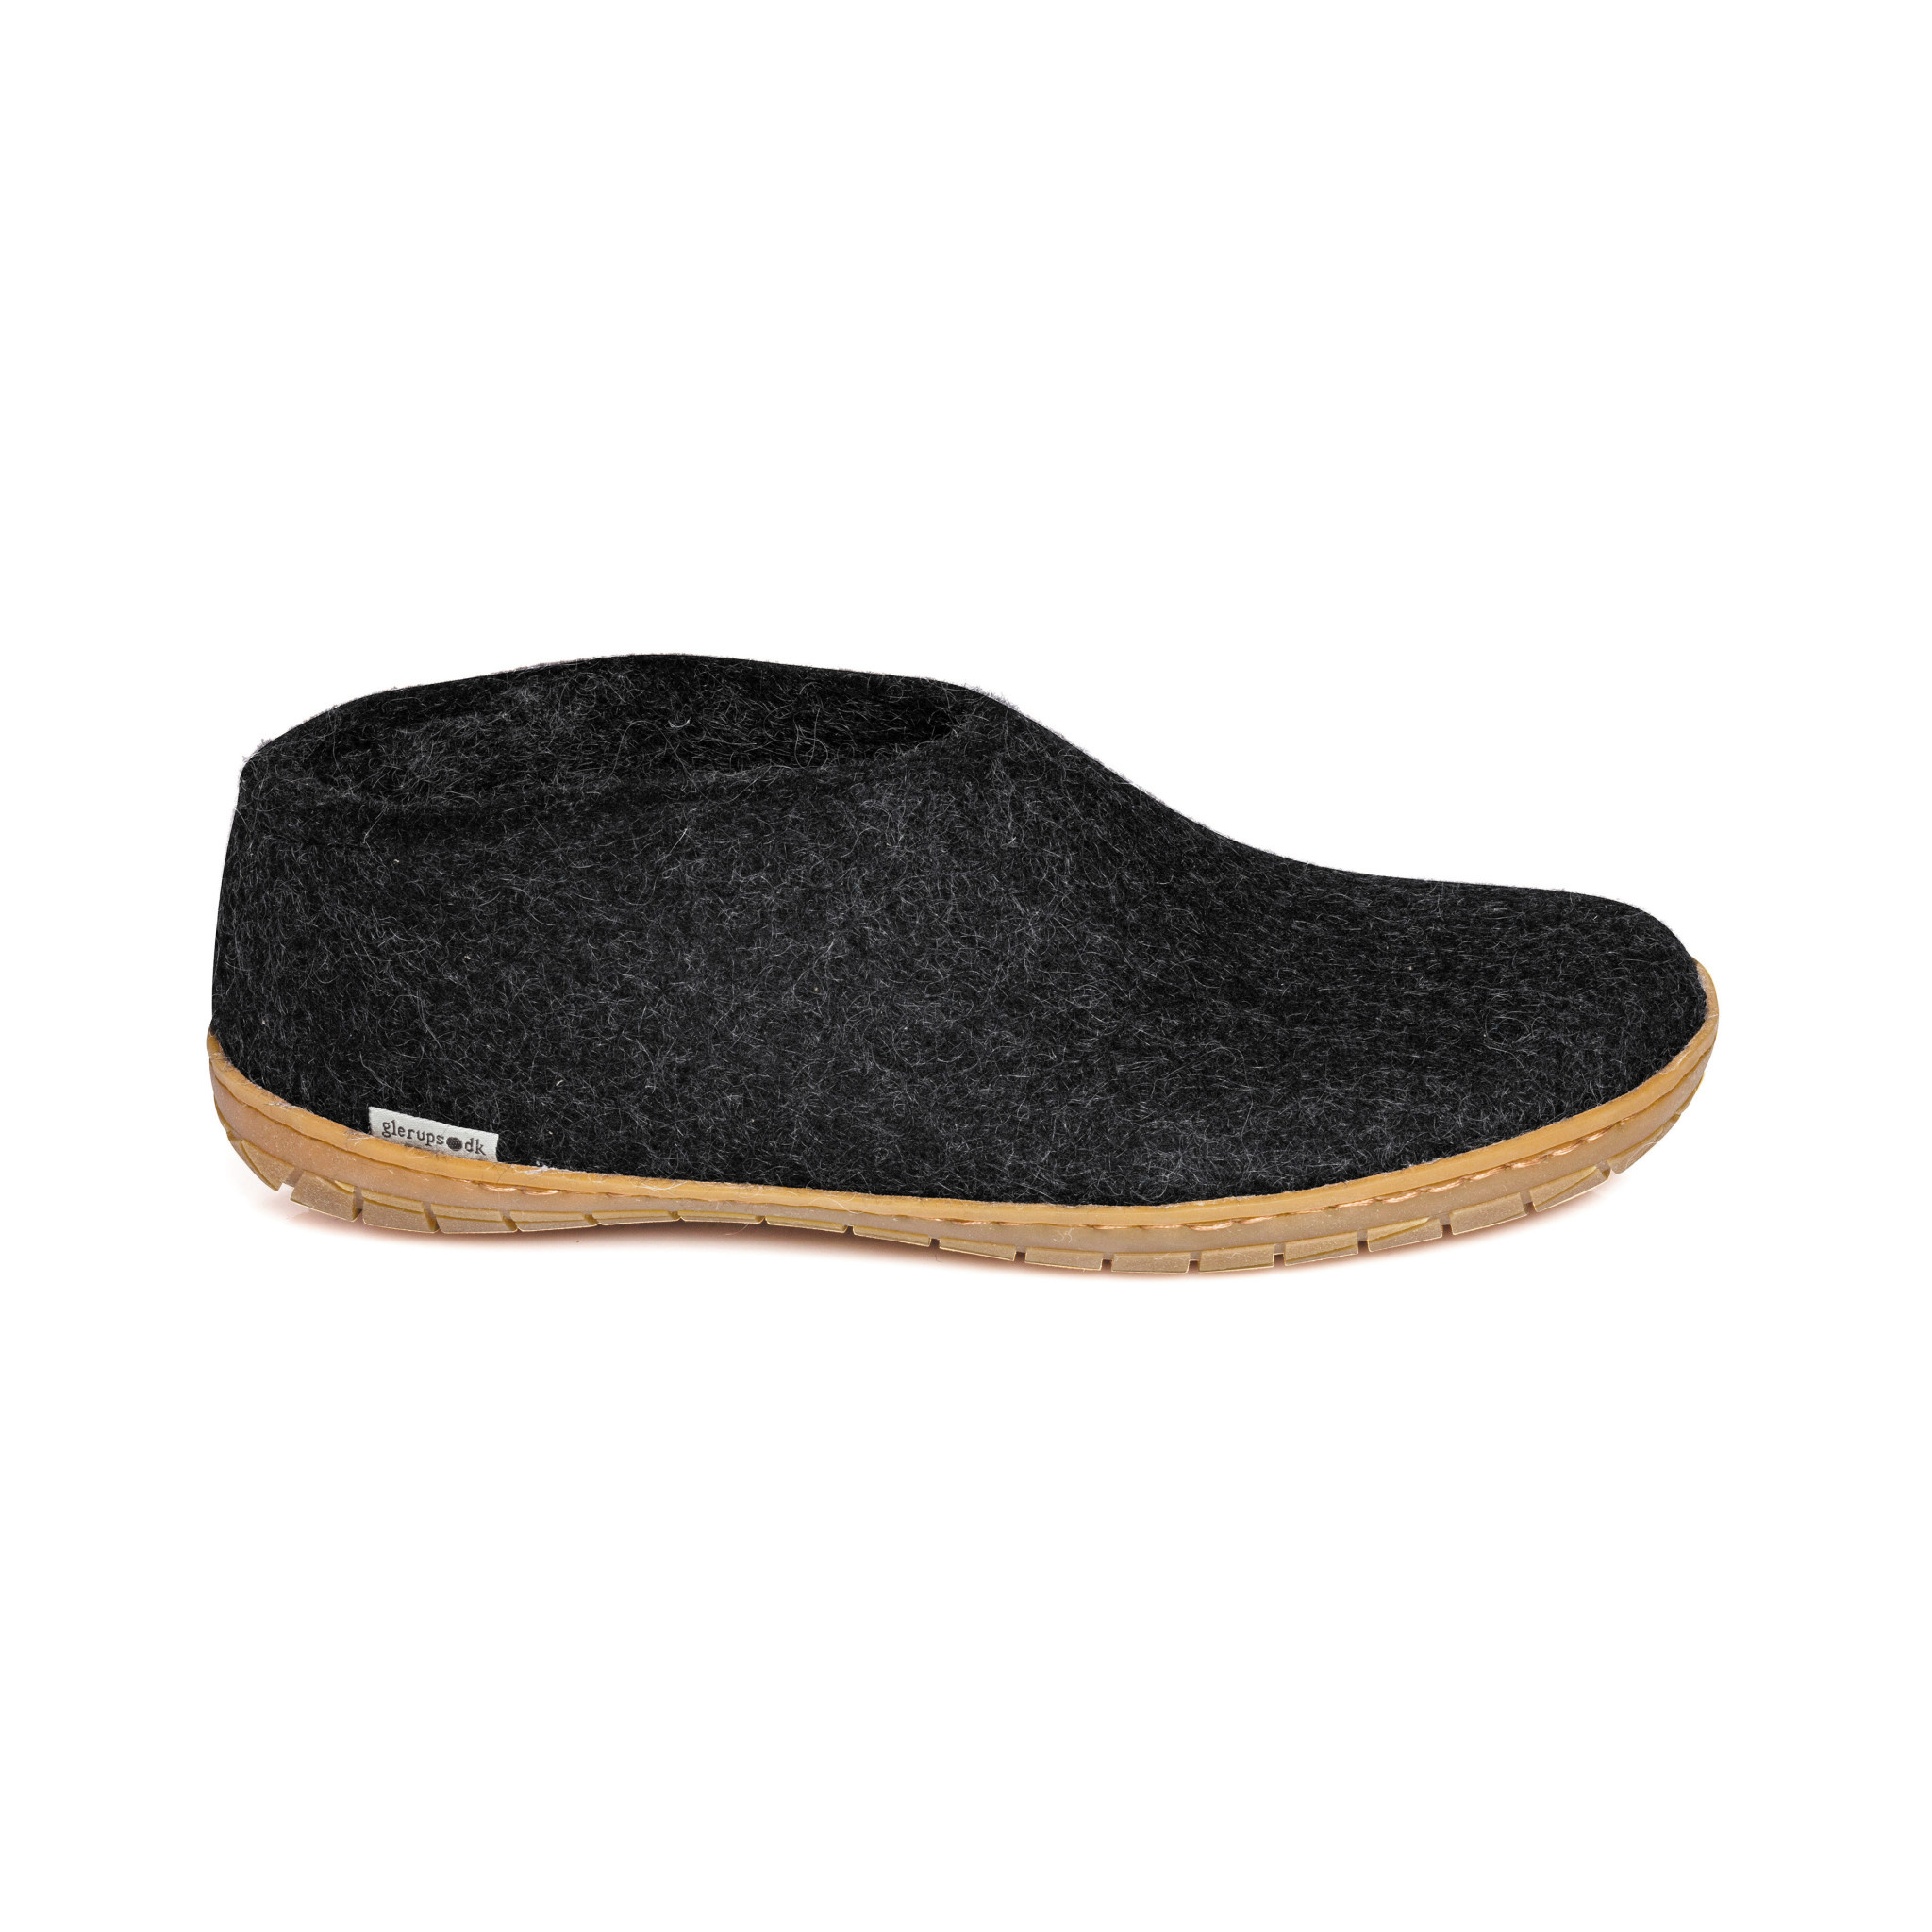 Glerups Glerups Shoe (rubber sole) - Charcoal (Anthracite)